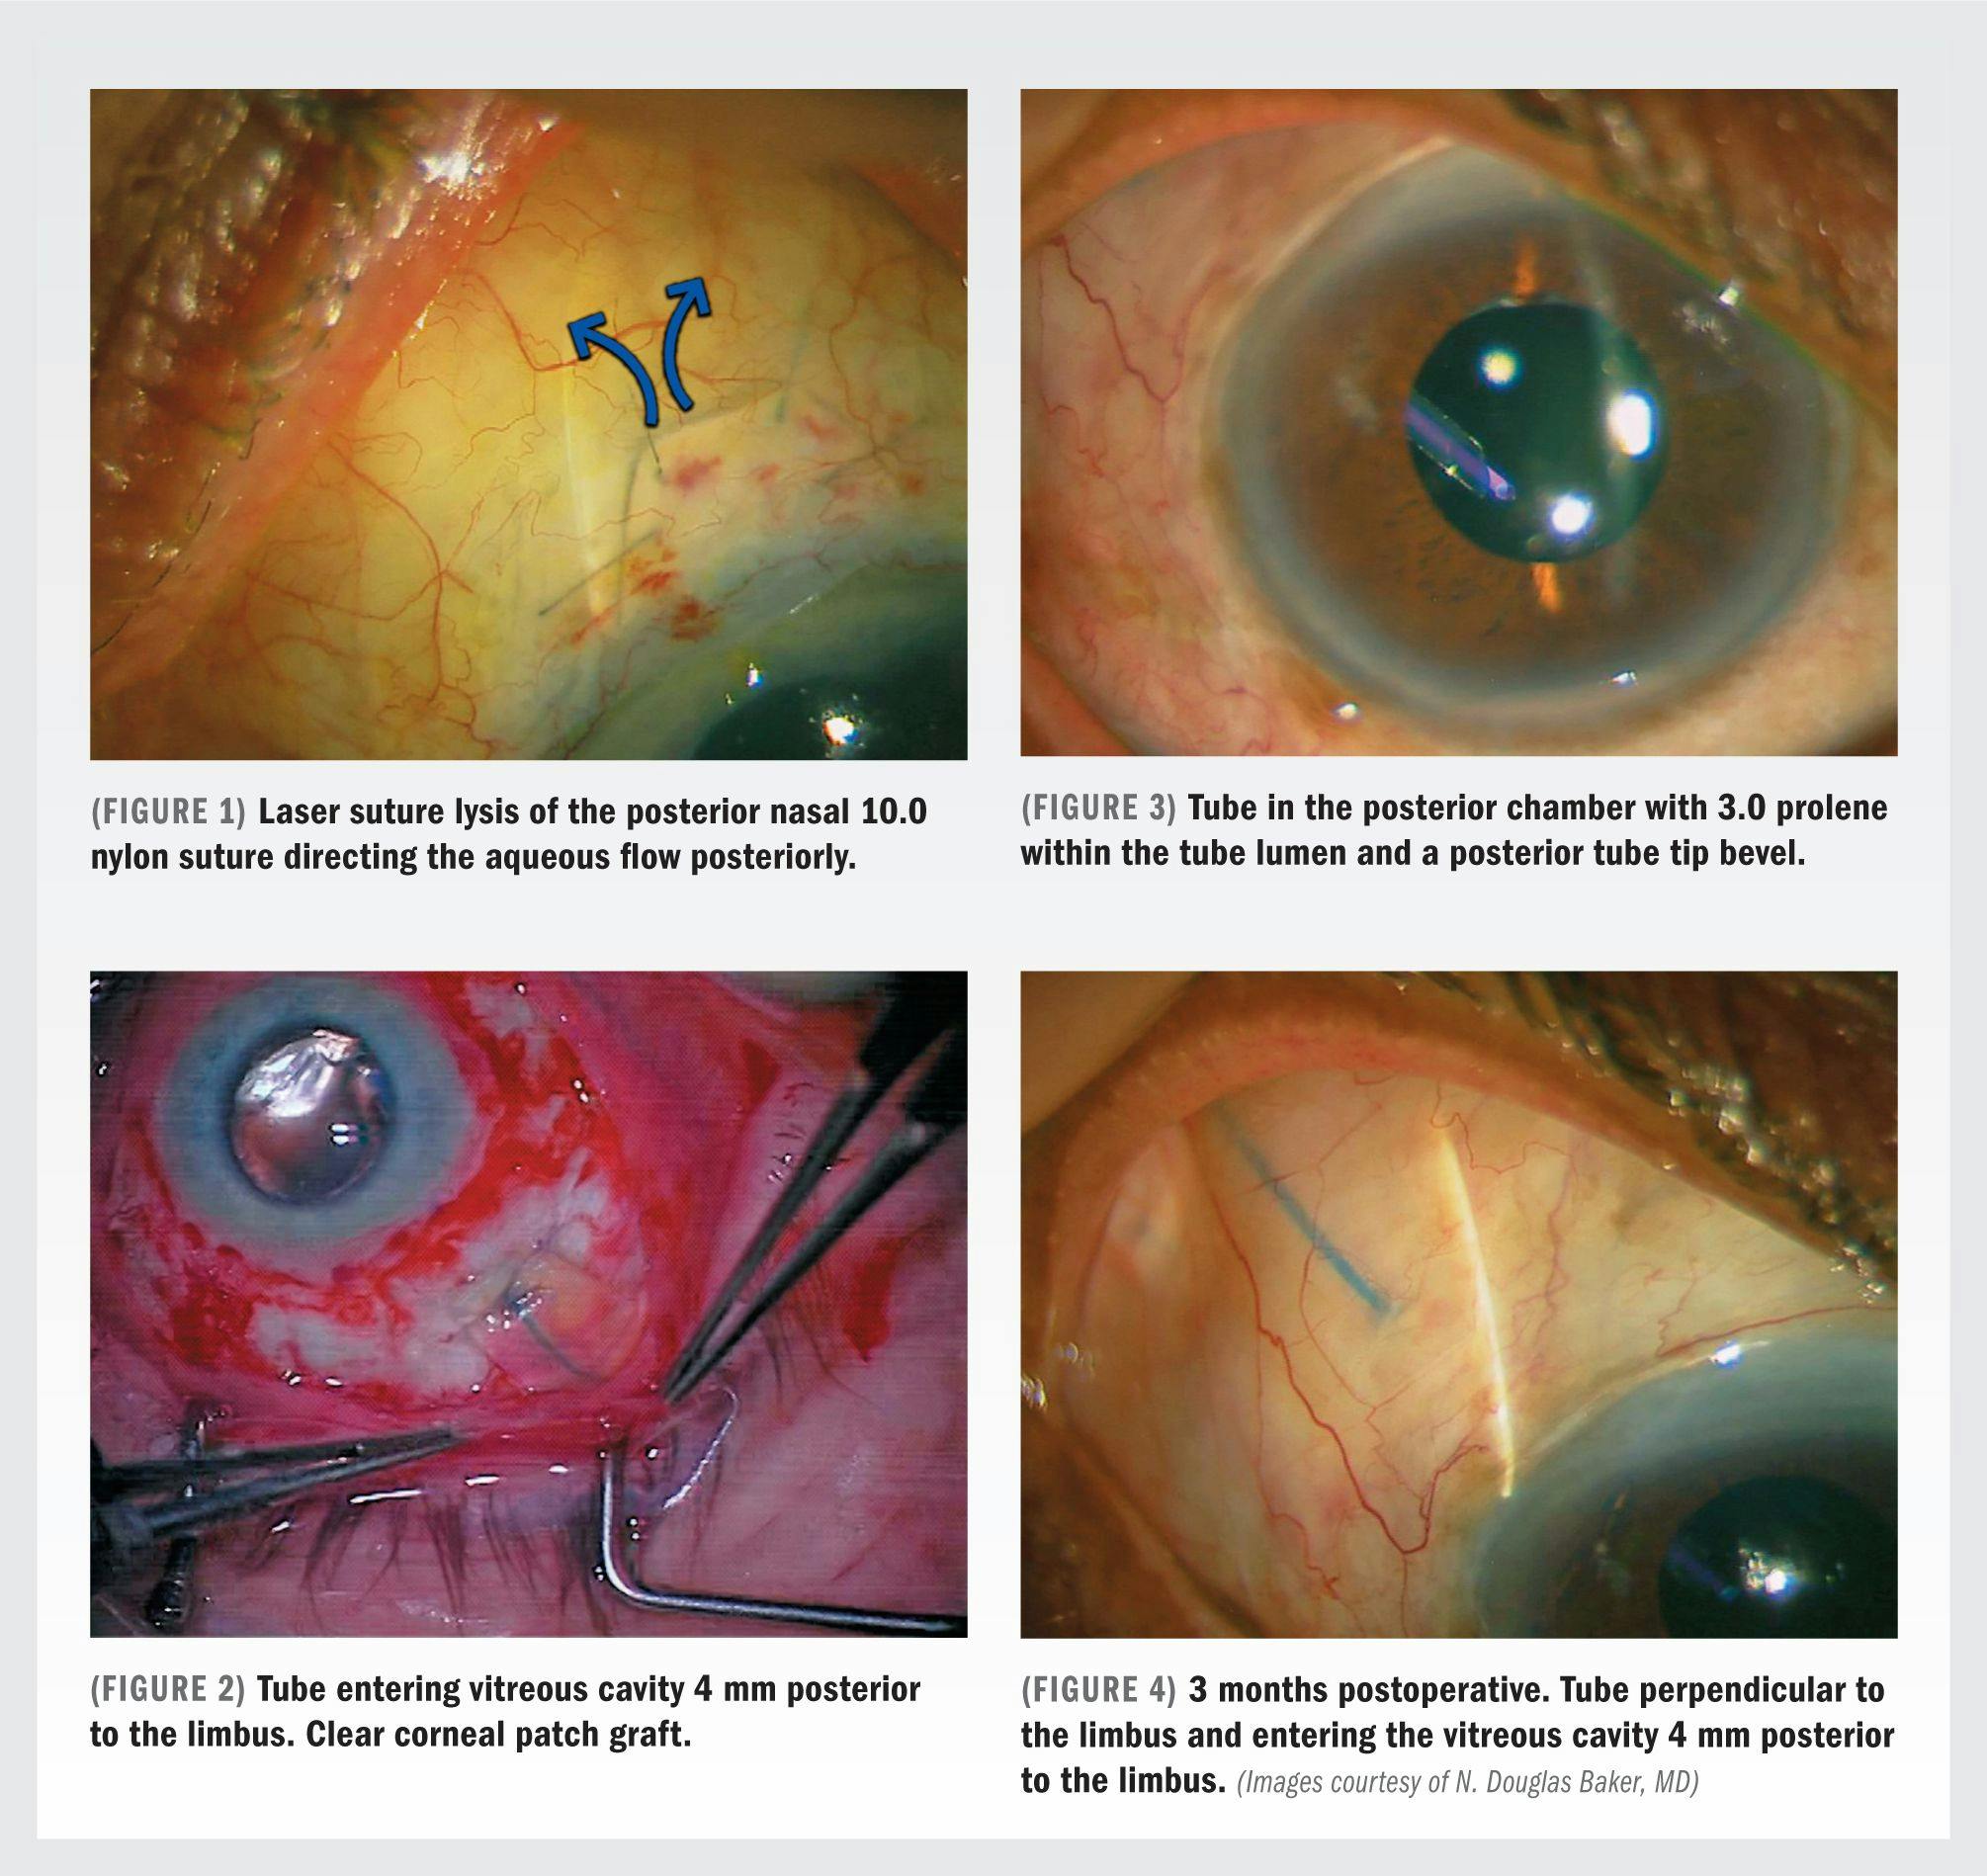 Intraoperative techniques in glaucoma focus on avoiding issues